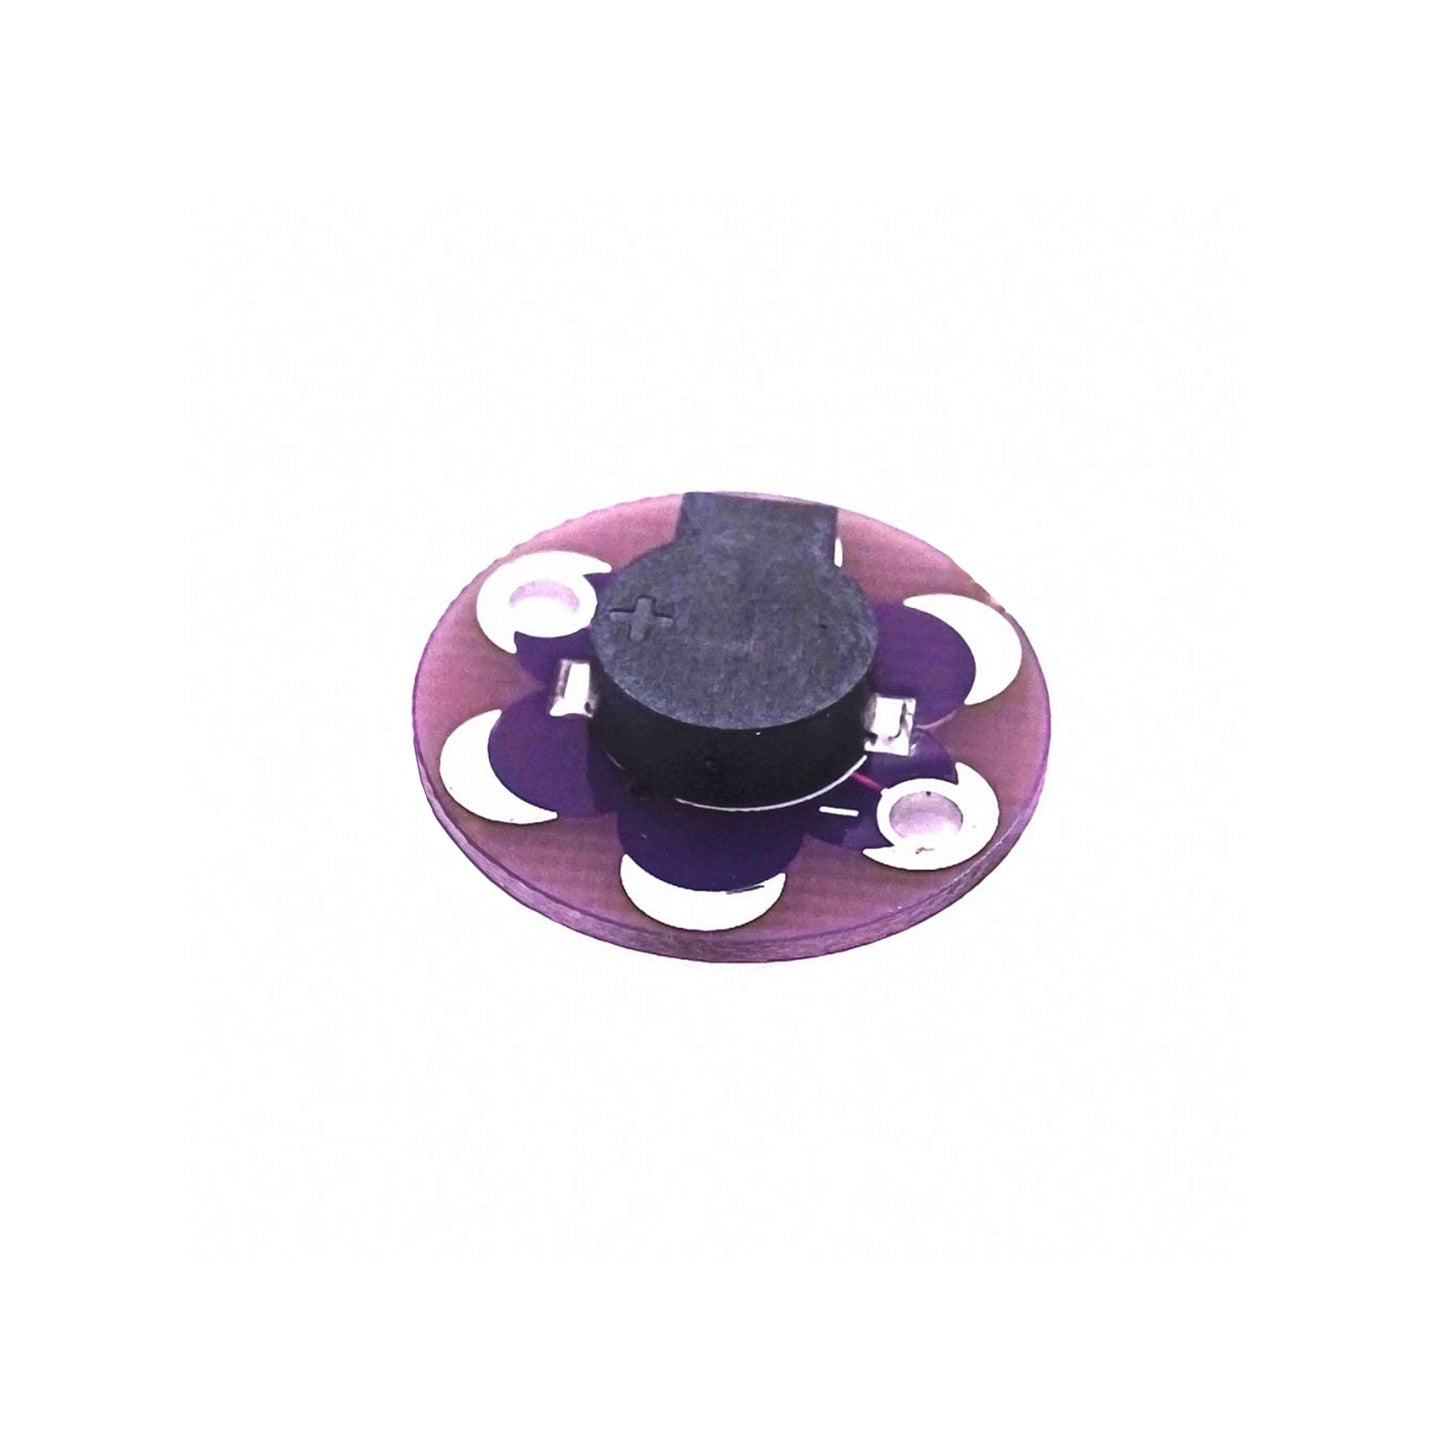 LilyPad Buzzer Small Speakers Module Compatible with Arduino - NA213 (RS3478) - REES52